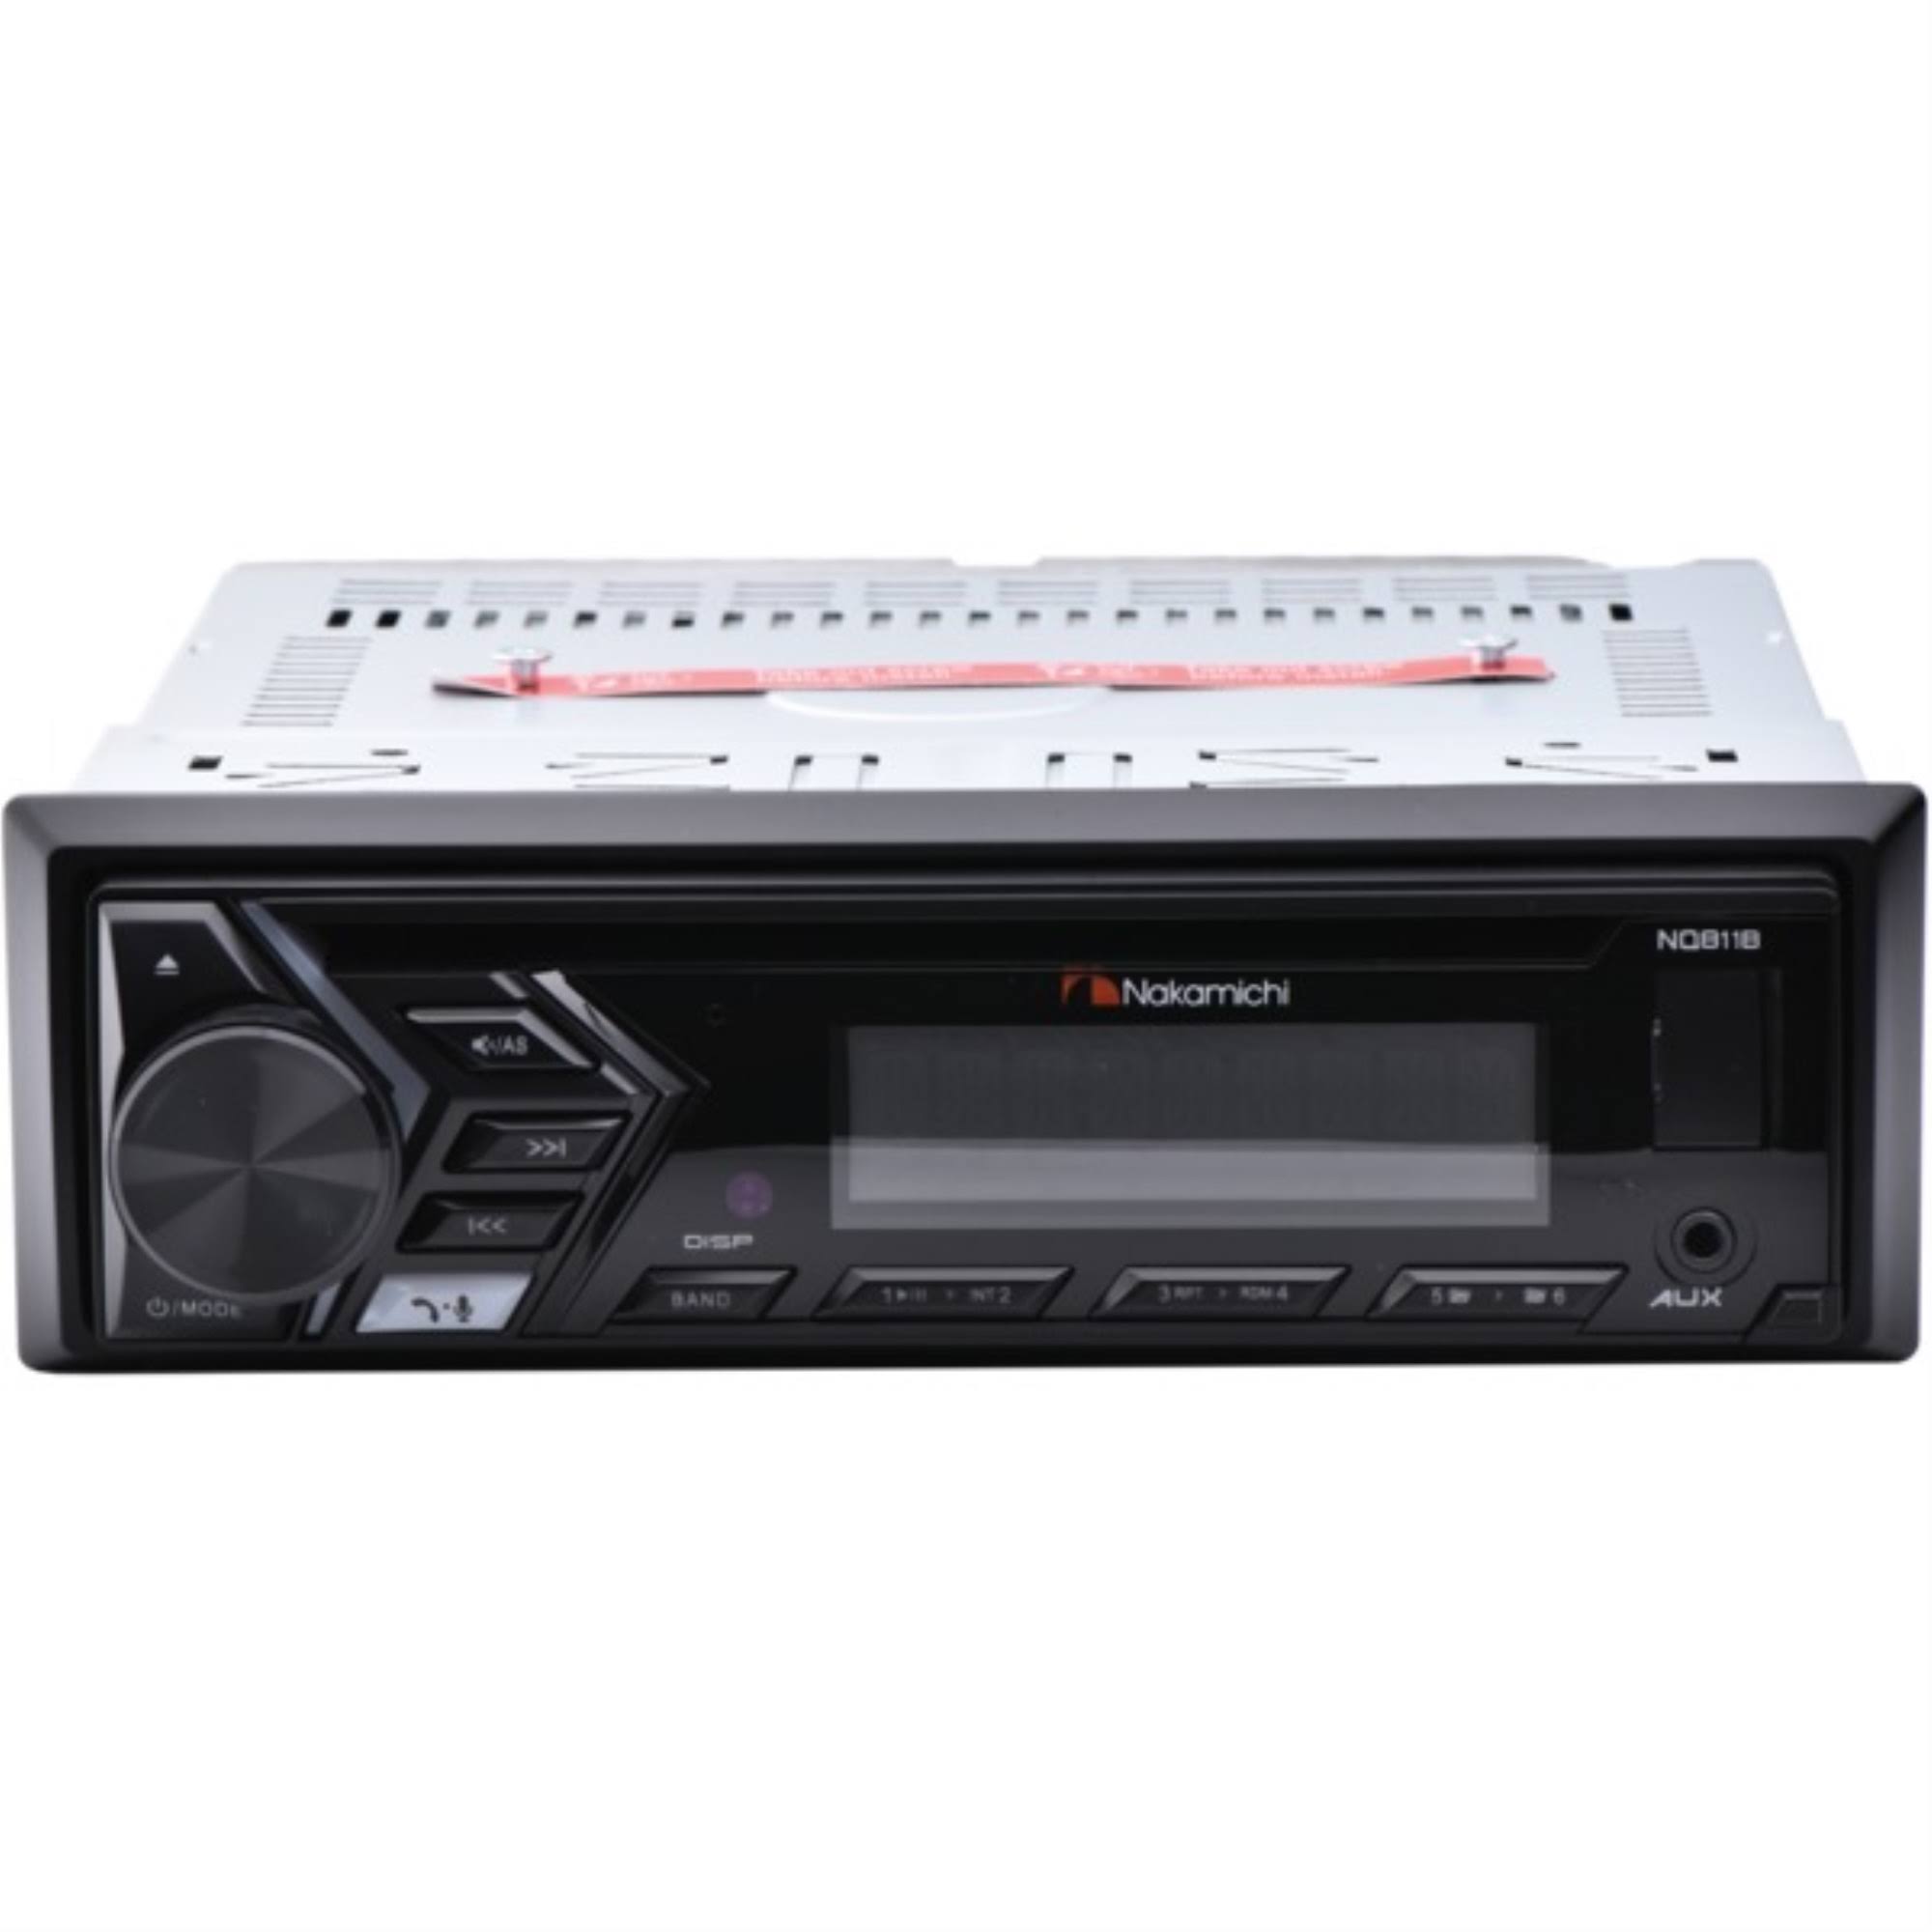 Nakamichi NQ811B Bluetooth CD MP3 Player Car Stereo Receiver with Built-in Bluetooth Hands-Free Calling Music Streaming USB AUX Inputs with